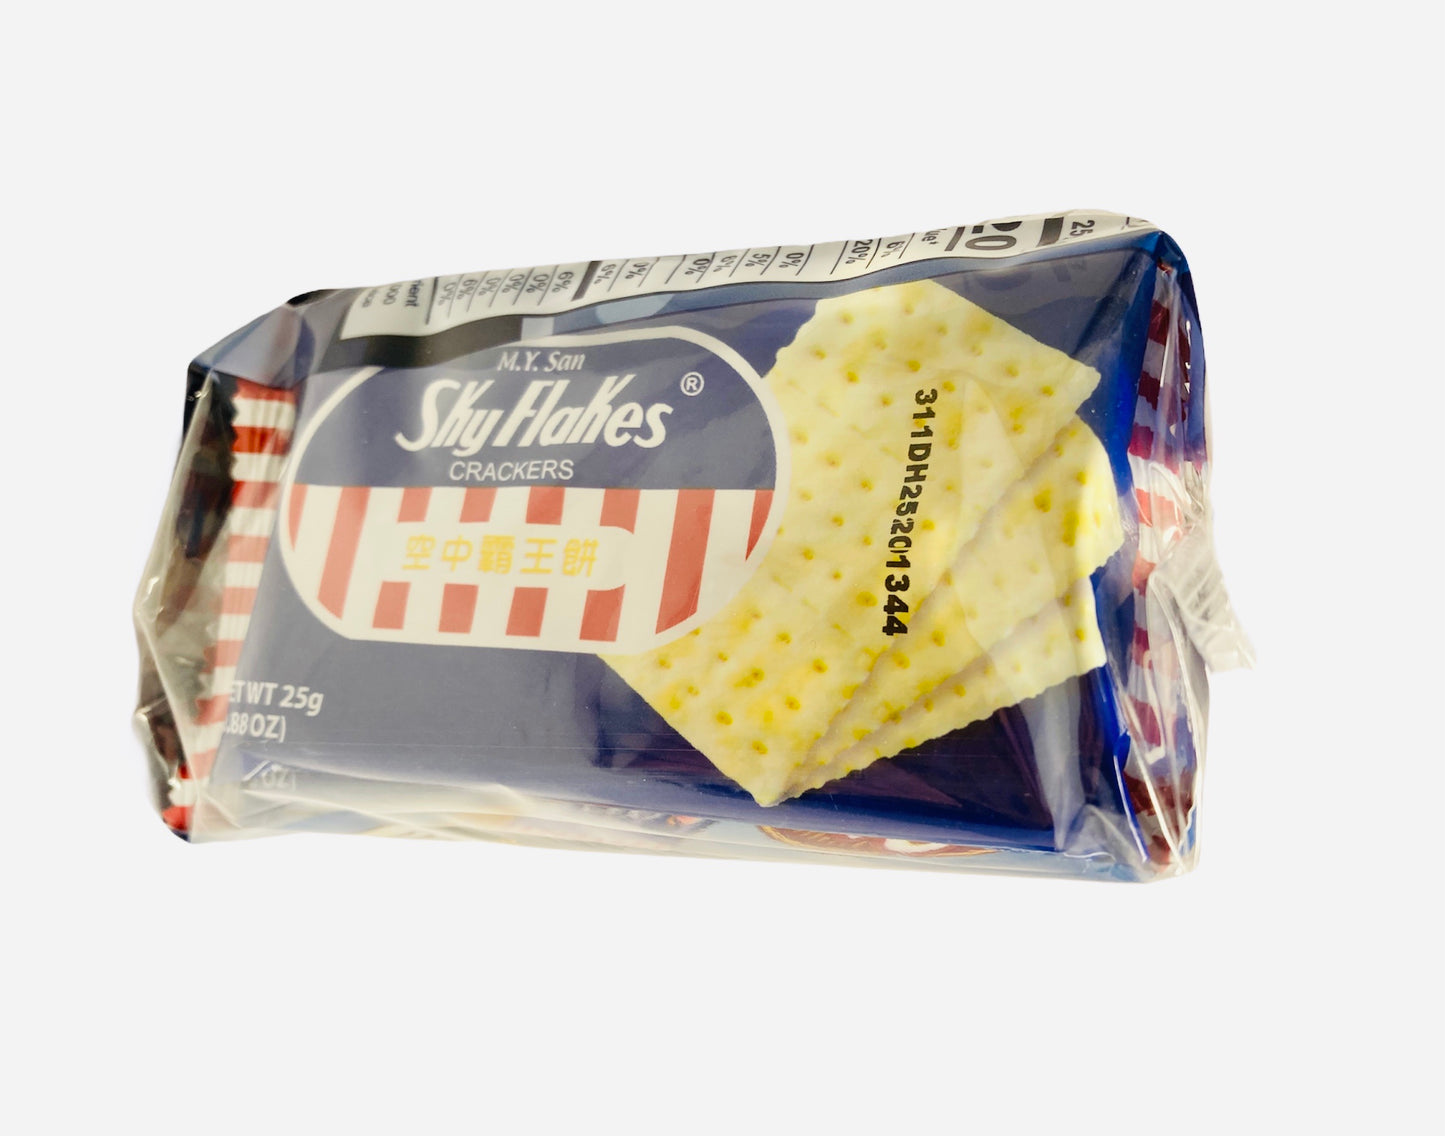 Sky Flakes Crackers 250g